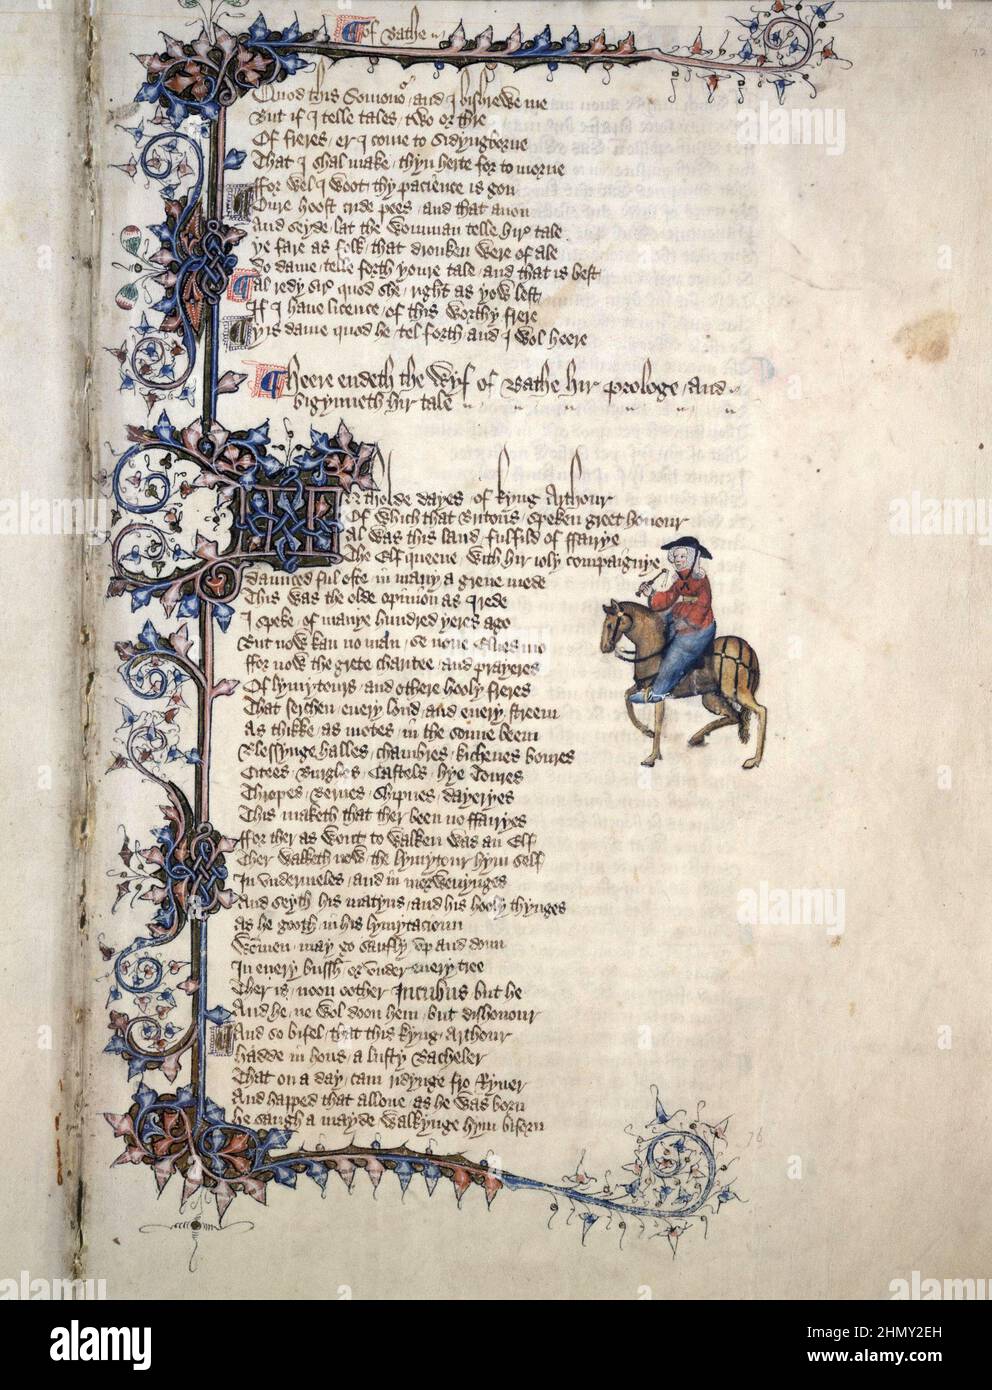 The Wife of Bath from The Ellesmere Chaucer (also called The Ellesmere Manuscript) of the Canterbury Tales. It  is an early 15th-century illuminated manuscript of Geoffrey Chaucer's famous work. Stock Photo